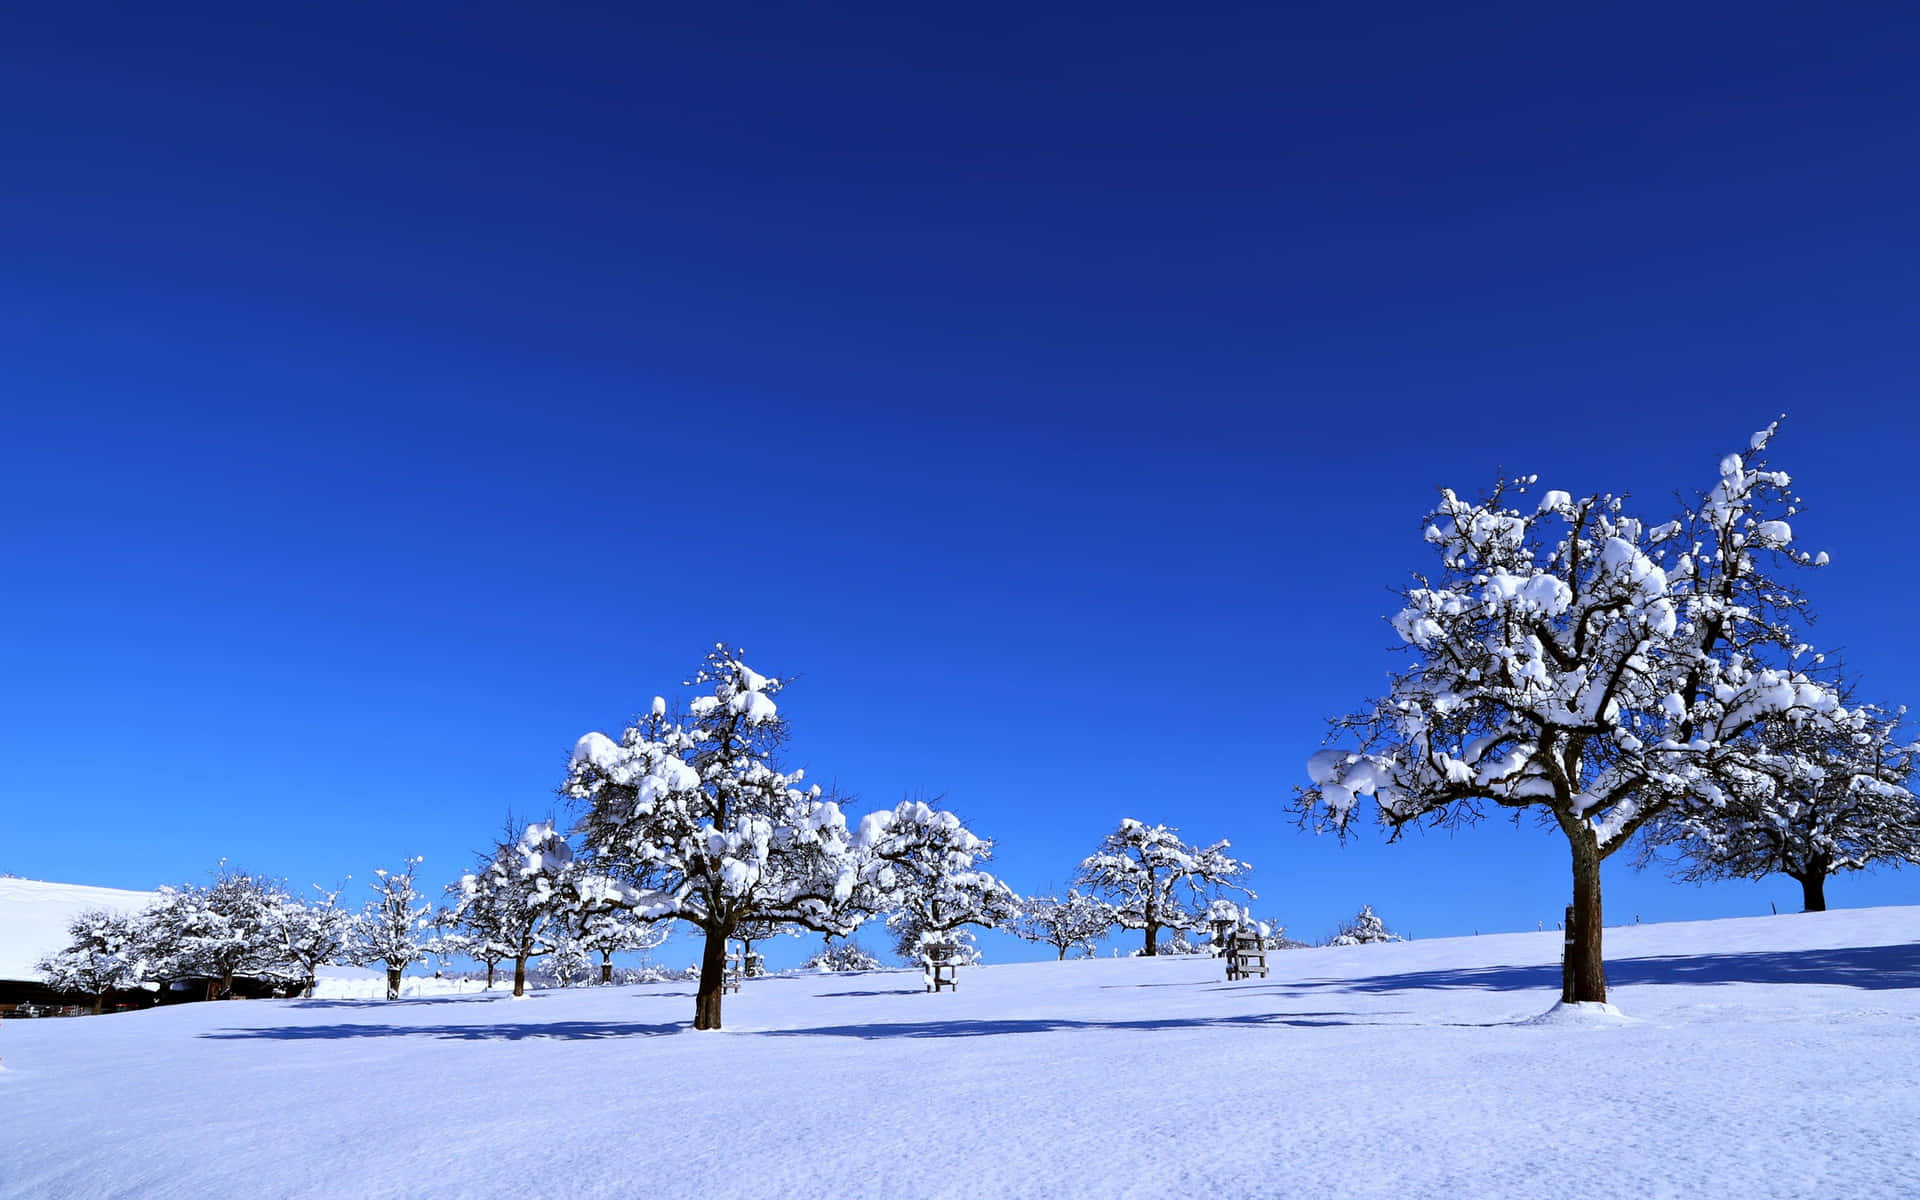 Winter landscape with pristine snow and leafless trees against a blue sky Wallpaper